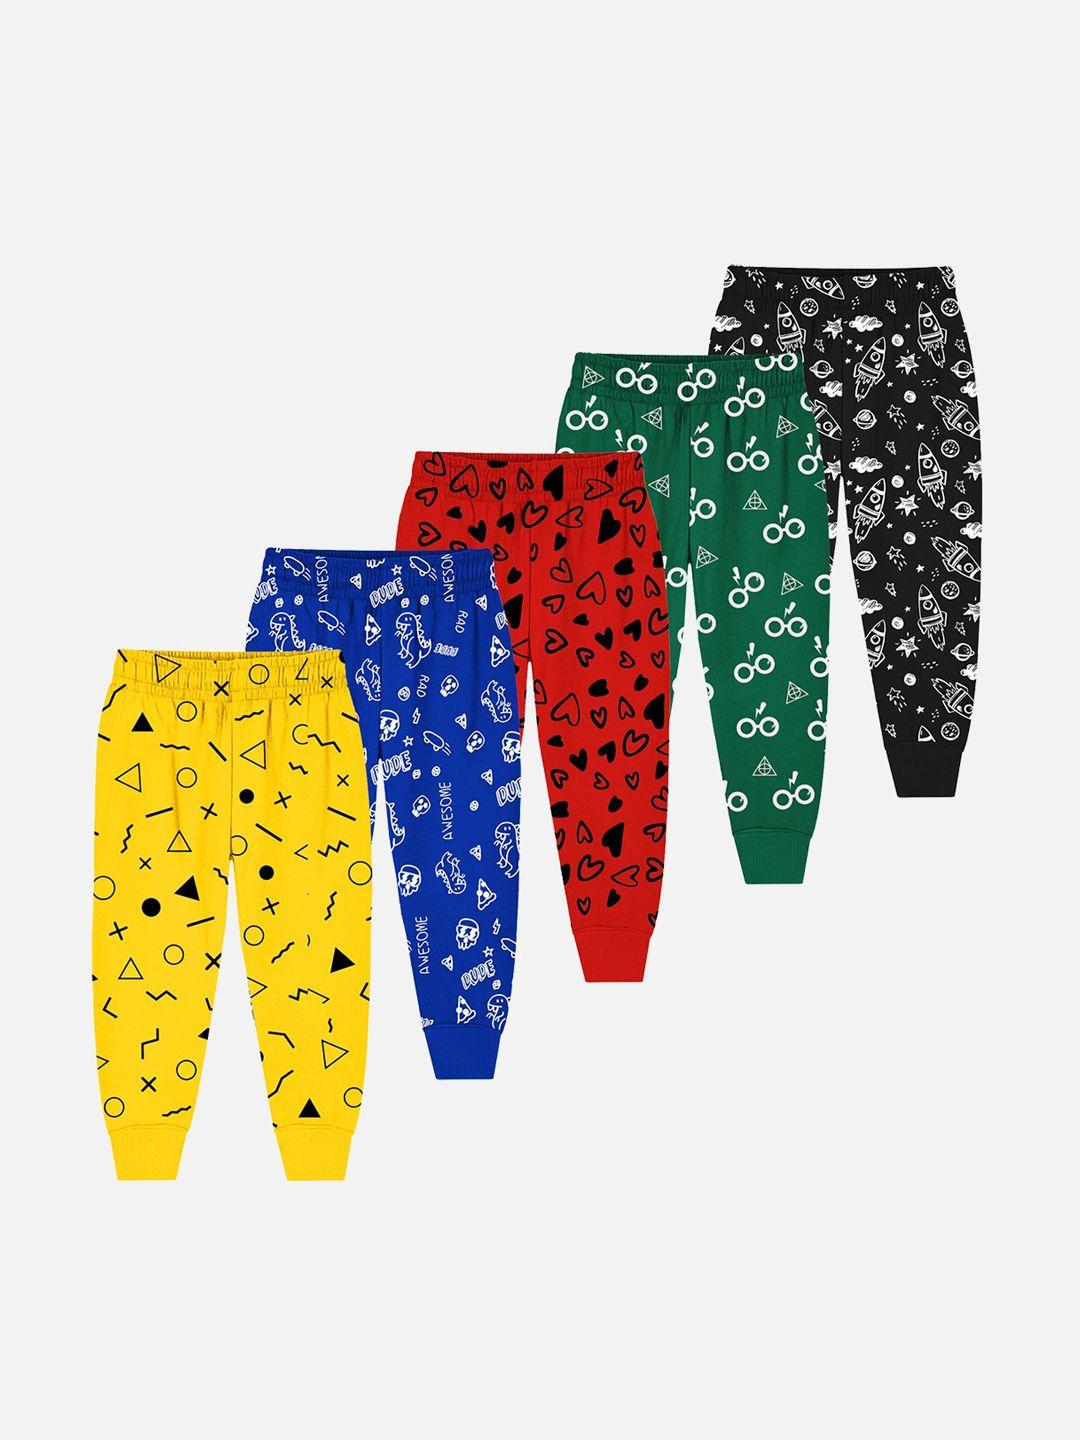 trampoline kids pack of 5 conversational printed cotton joggers